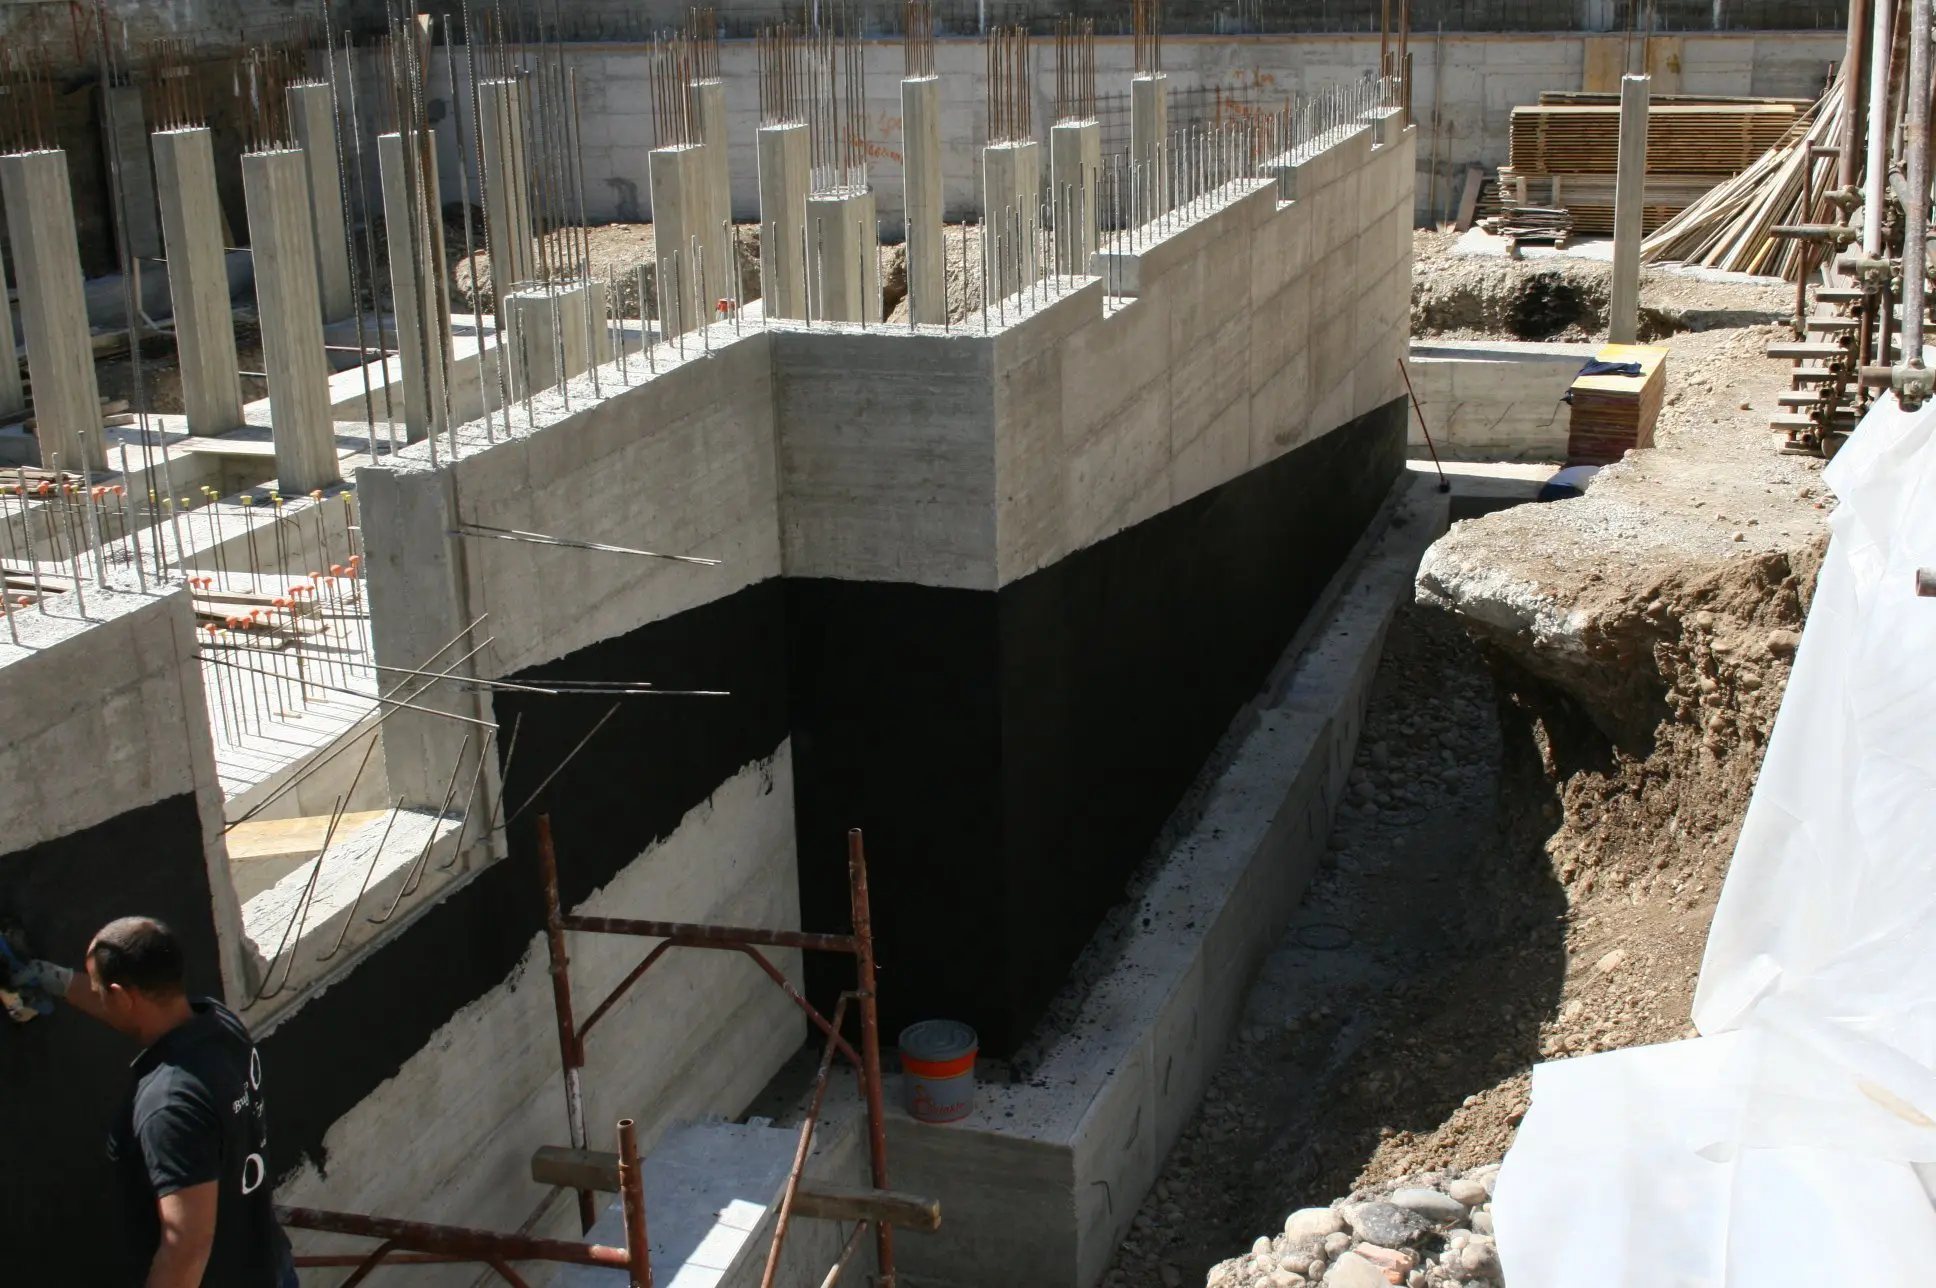 foundational structure with waterproofing and sealant practices applied